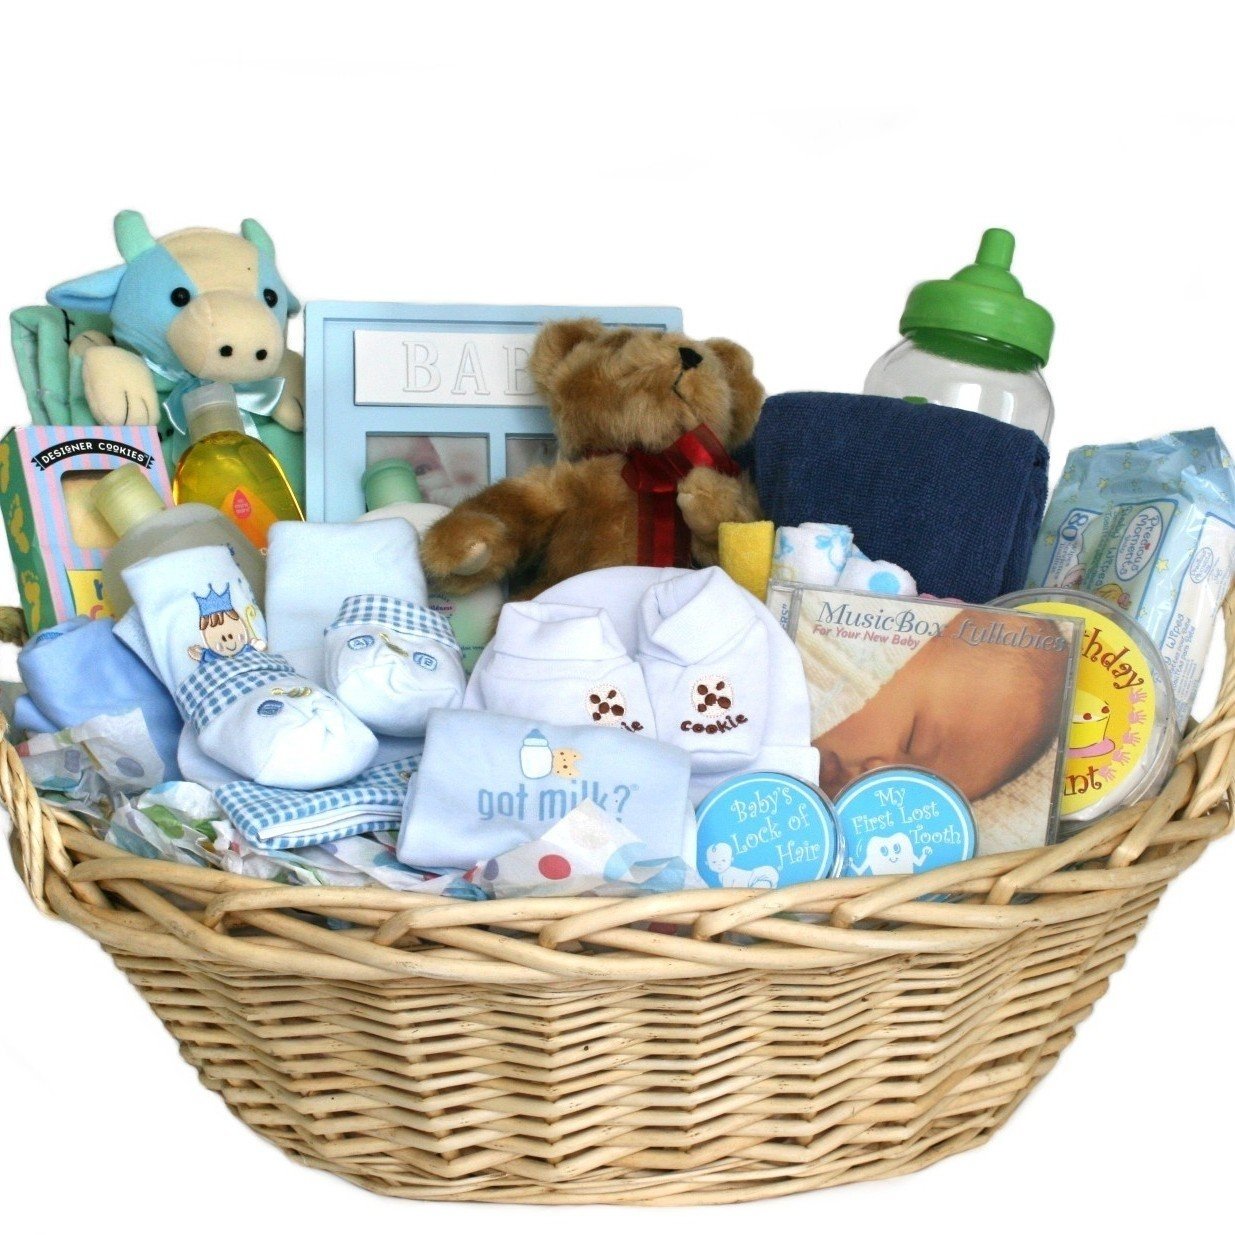 10 Unique Gift Ideas For New Baby ideas breathtaking baby shower gift for boy diy baskets a homemade 2022